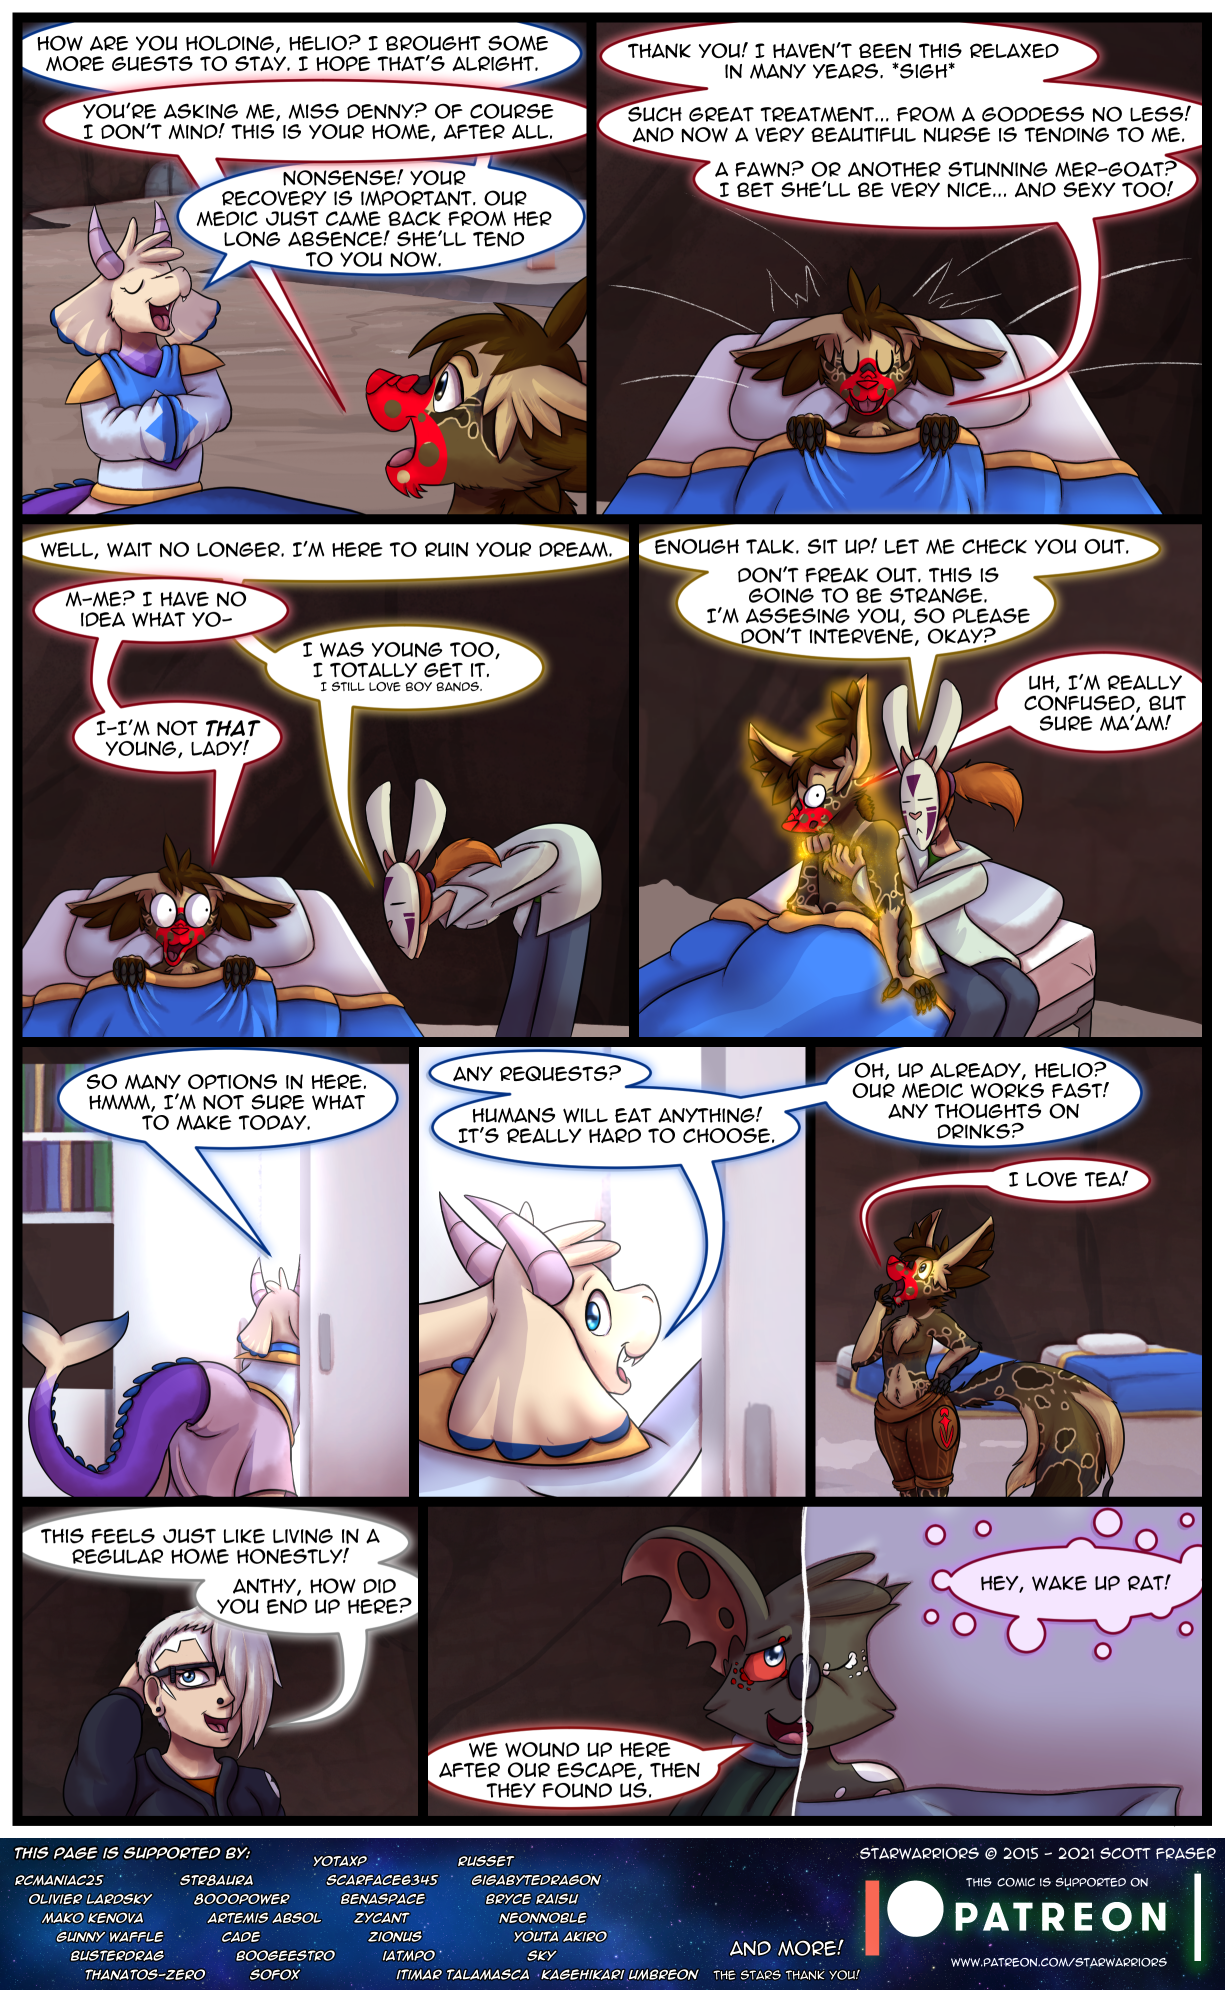 Ch5 Page 33 – Resting